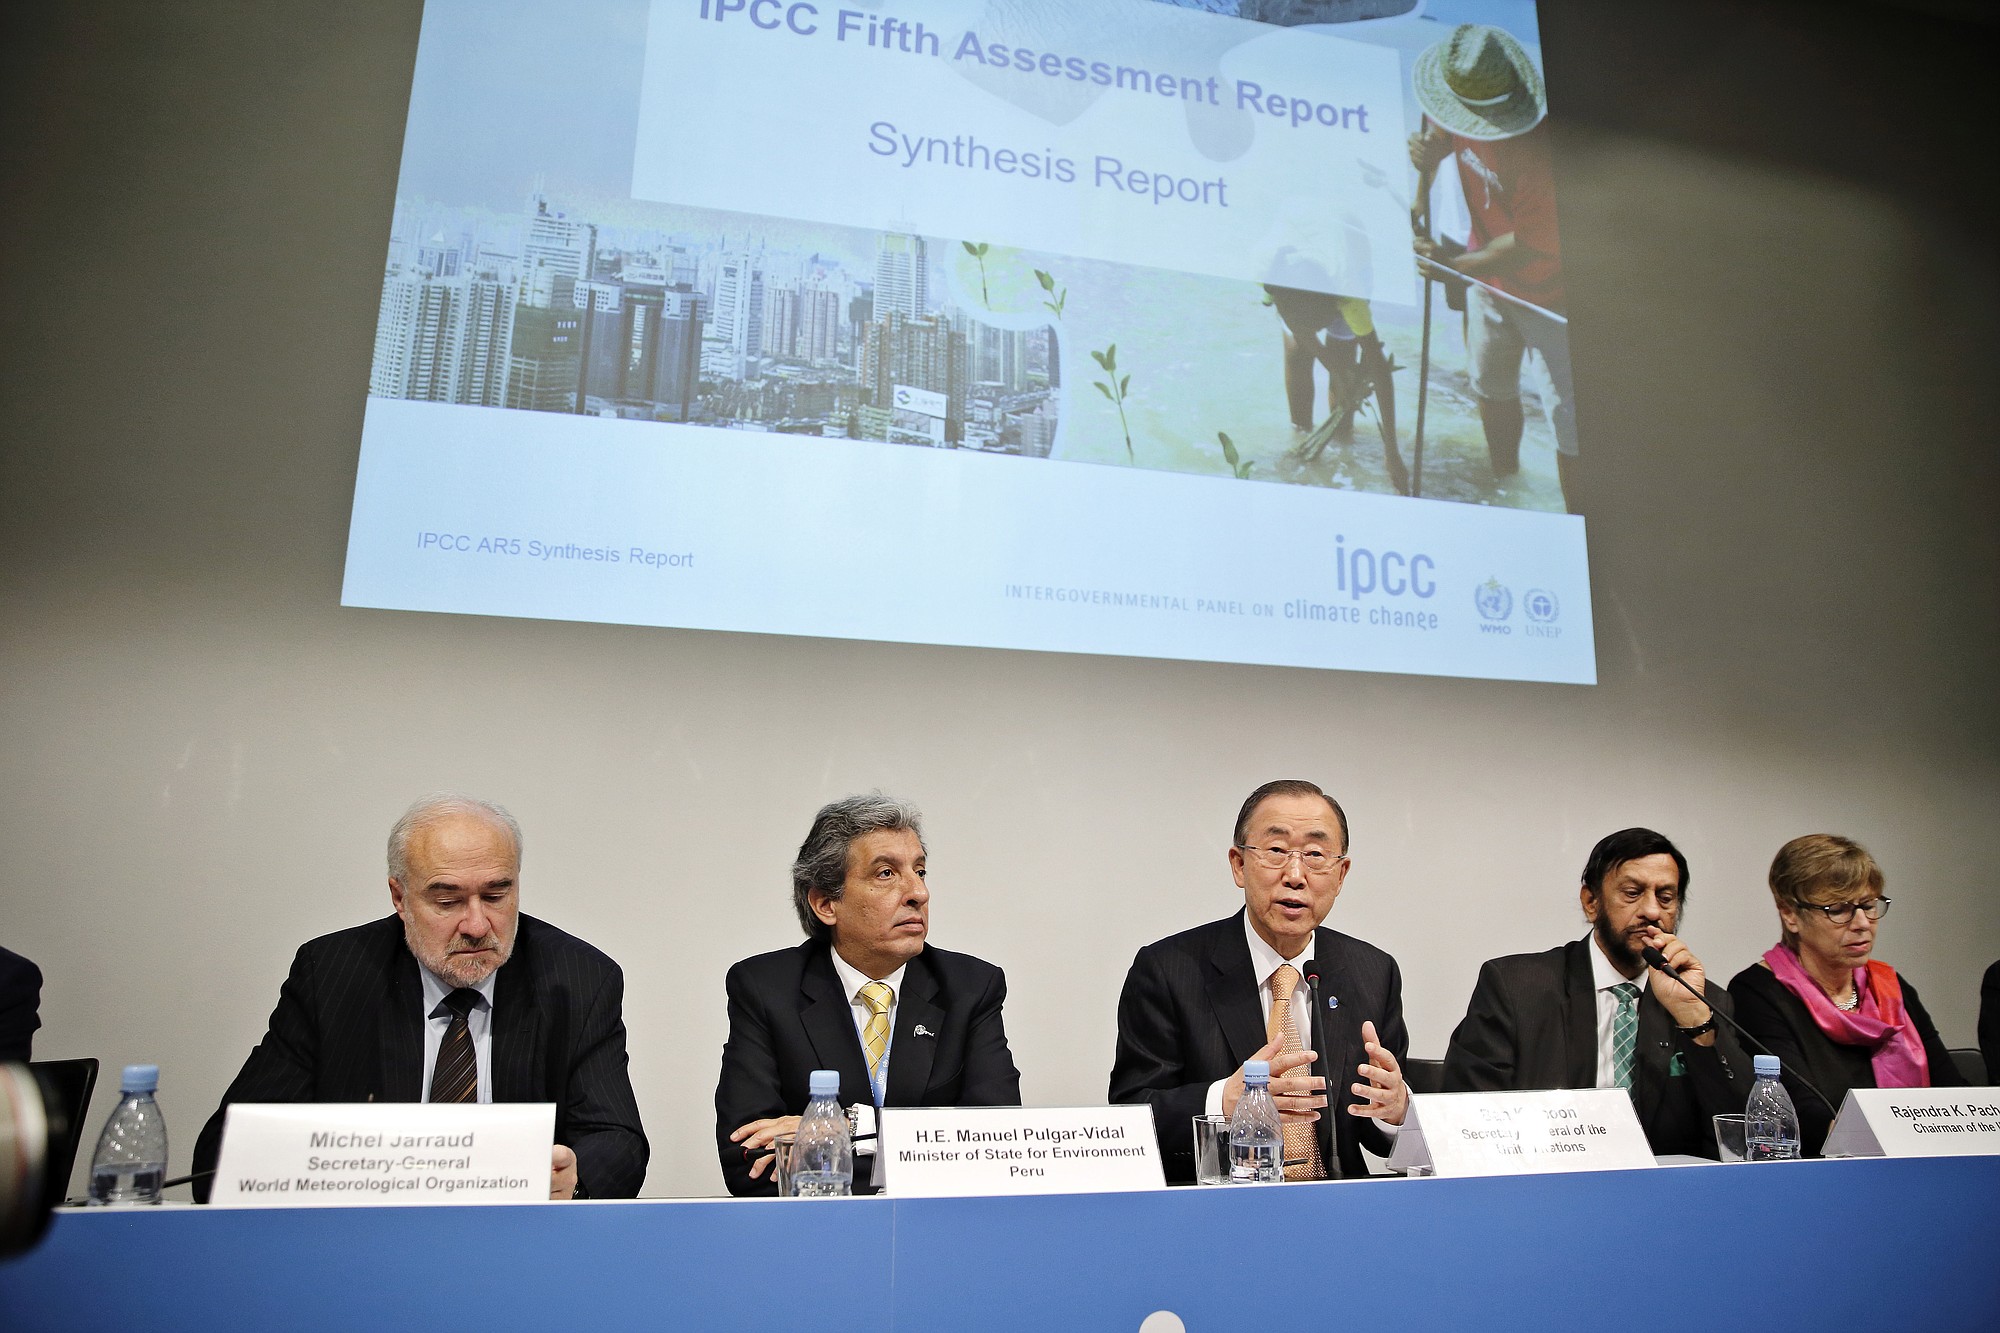 Presenting a report on climate change, with from left, Secretary-General World Meteoroligical Organization, Michel Jarraud, Minister of State for Envionment of Peru Manuel Pulgar-Vidal, UN Secretary General Ban Ki-moon, Chairman of the IPCC Rajendra K. Pachauri and Secretary of the IPCC Renata Christ, present a comprehensive report by the UN climate panel, summarizing the three interim reports previously released on climate changes, Sunday Nov. 2. 2014, at Tivoli Congress Center in Copenhagen, Denmark.